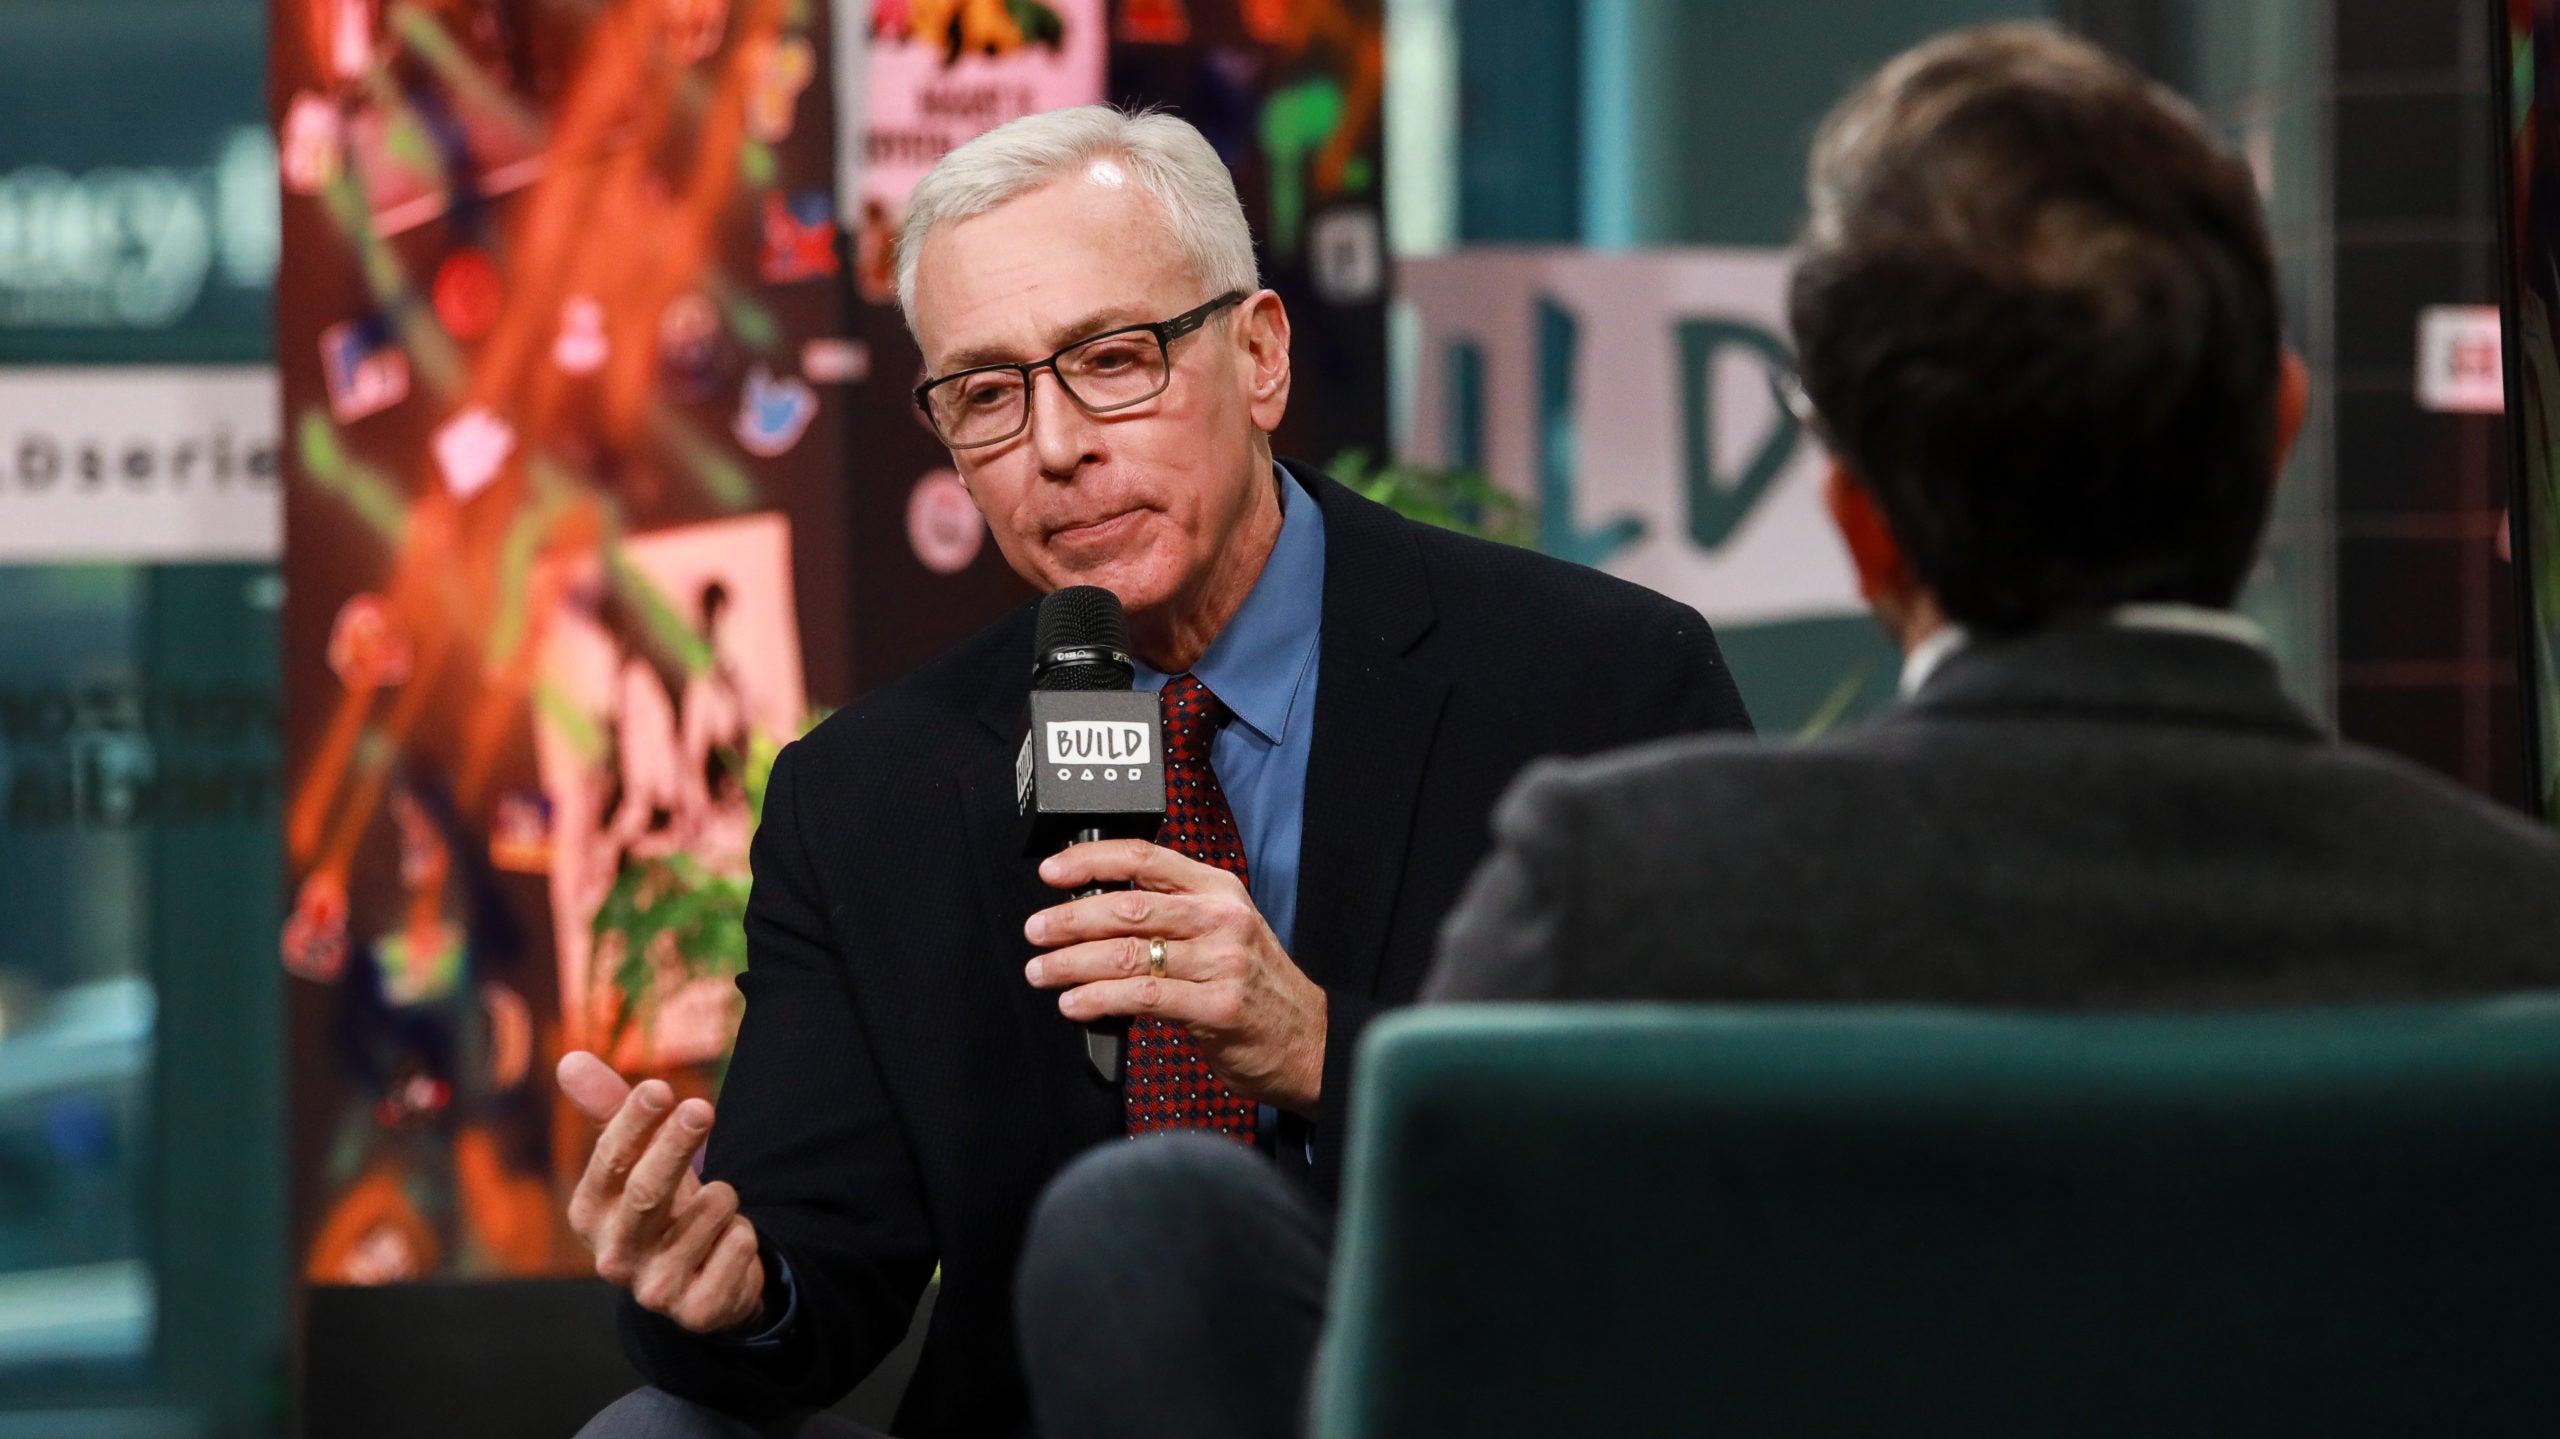 Dr Drew Apologizes For Virus Comments After Caught In Video Mashup Wish Tv Indianapolis News Indiana Weather Indiana Traffic